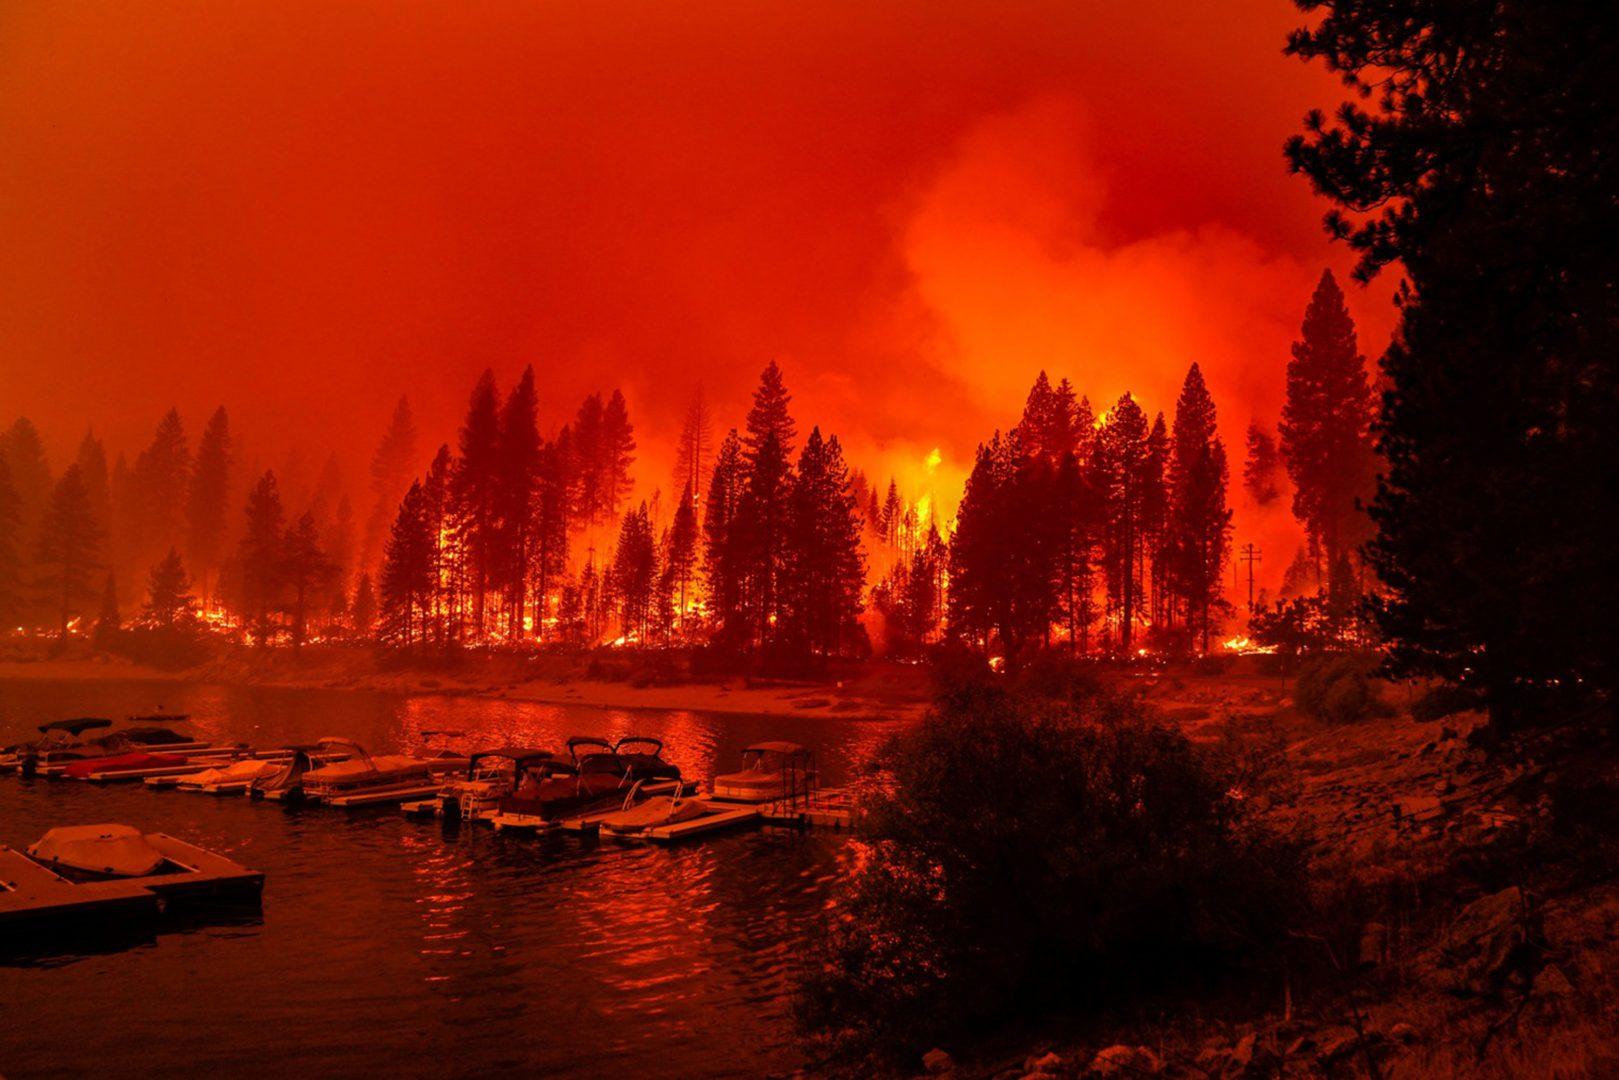 In this file photo, firefighters conduct a back burn operation along CA-168 during the Creek Fire as it approaches the Shaver Lake Marina on Sunday, Sept. 6, 2020 in Shaver Lake, CA. (Kent Nishimura/Los Angeles Times/TNS)